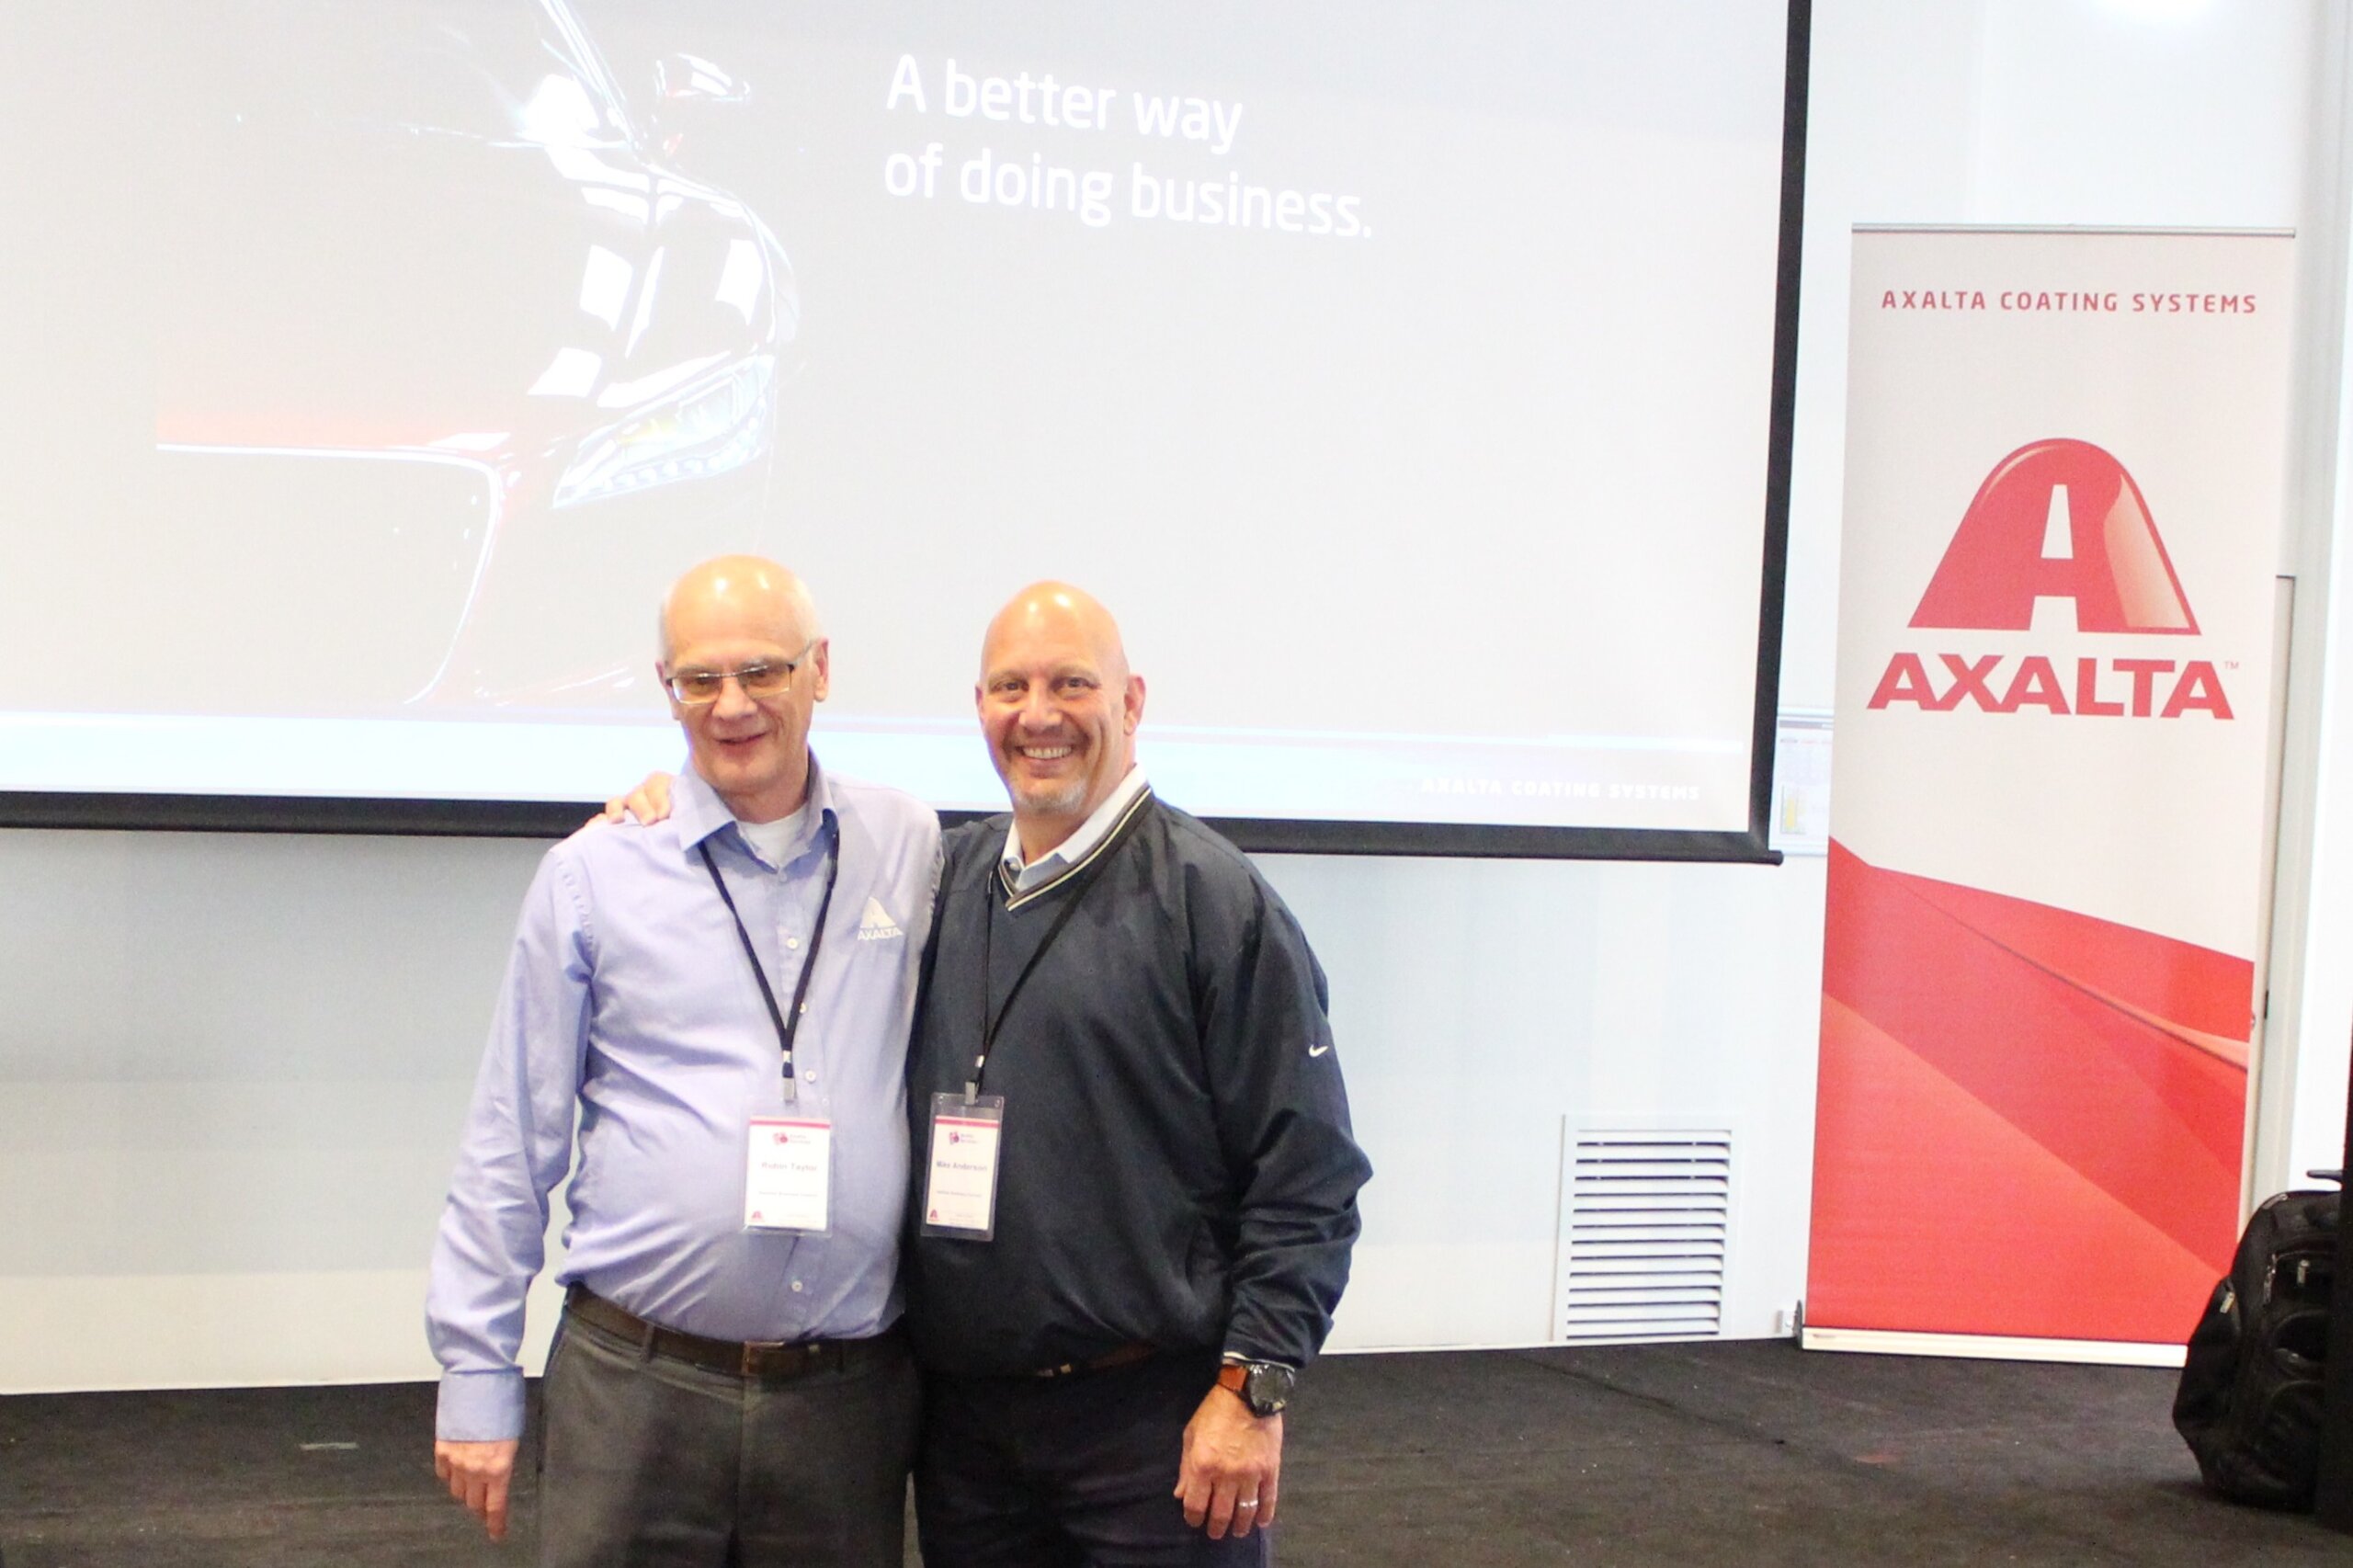 Axalta Gold Coast Seminar Will Feature Mike Anderson, Covering Digital Transformation And AI